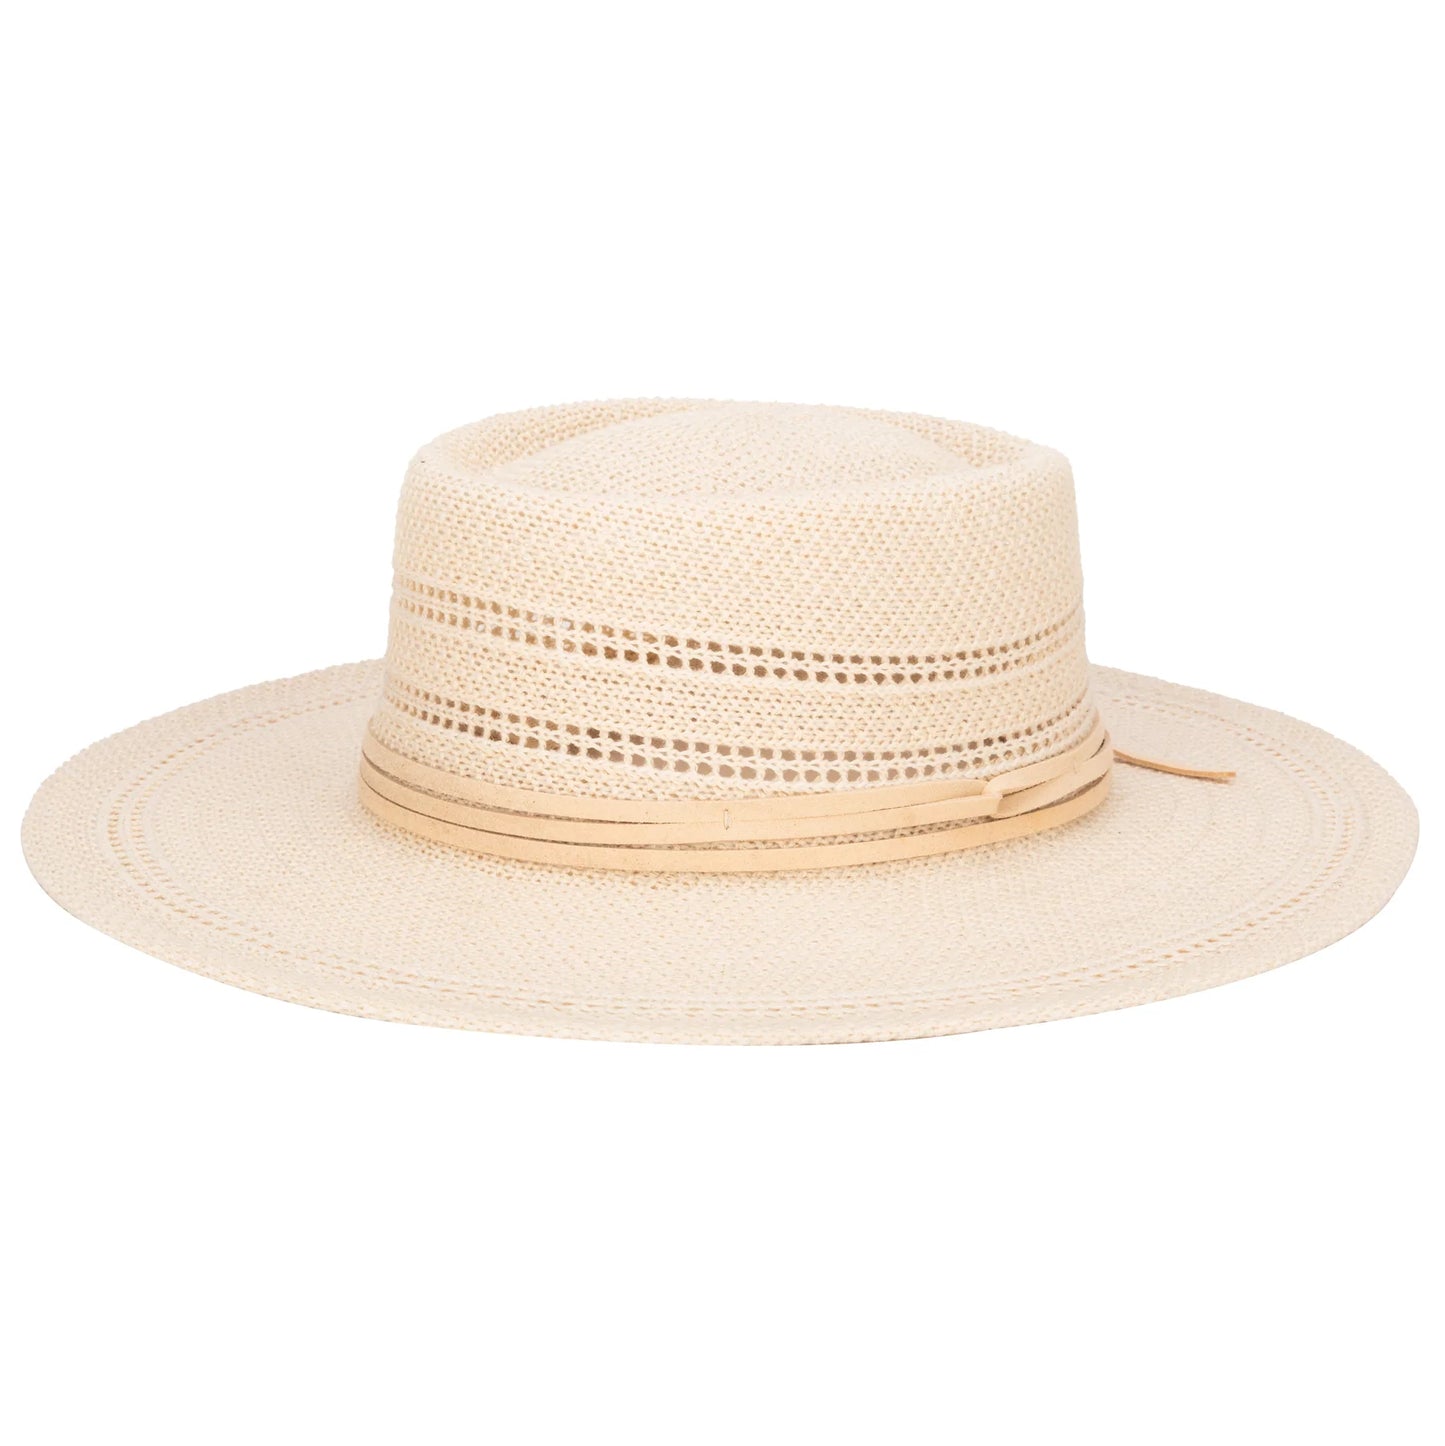 Jackson Boater Hat in Ivory Hair Accessories in  at Wrapsody